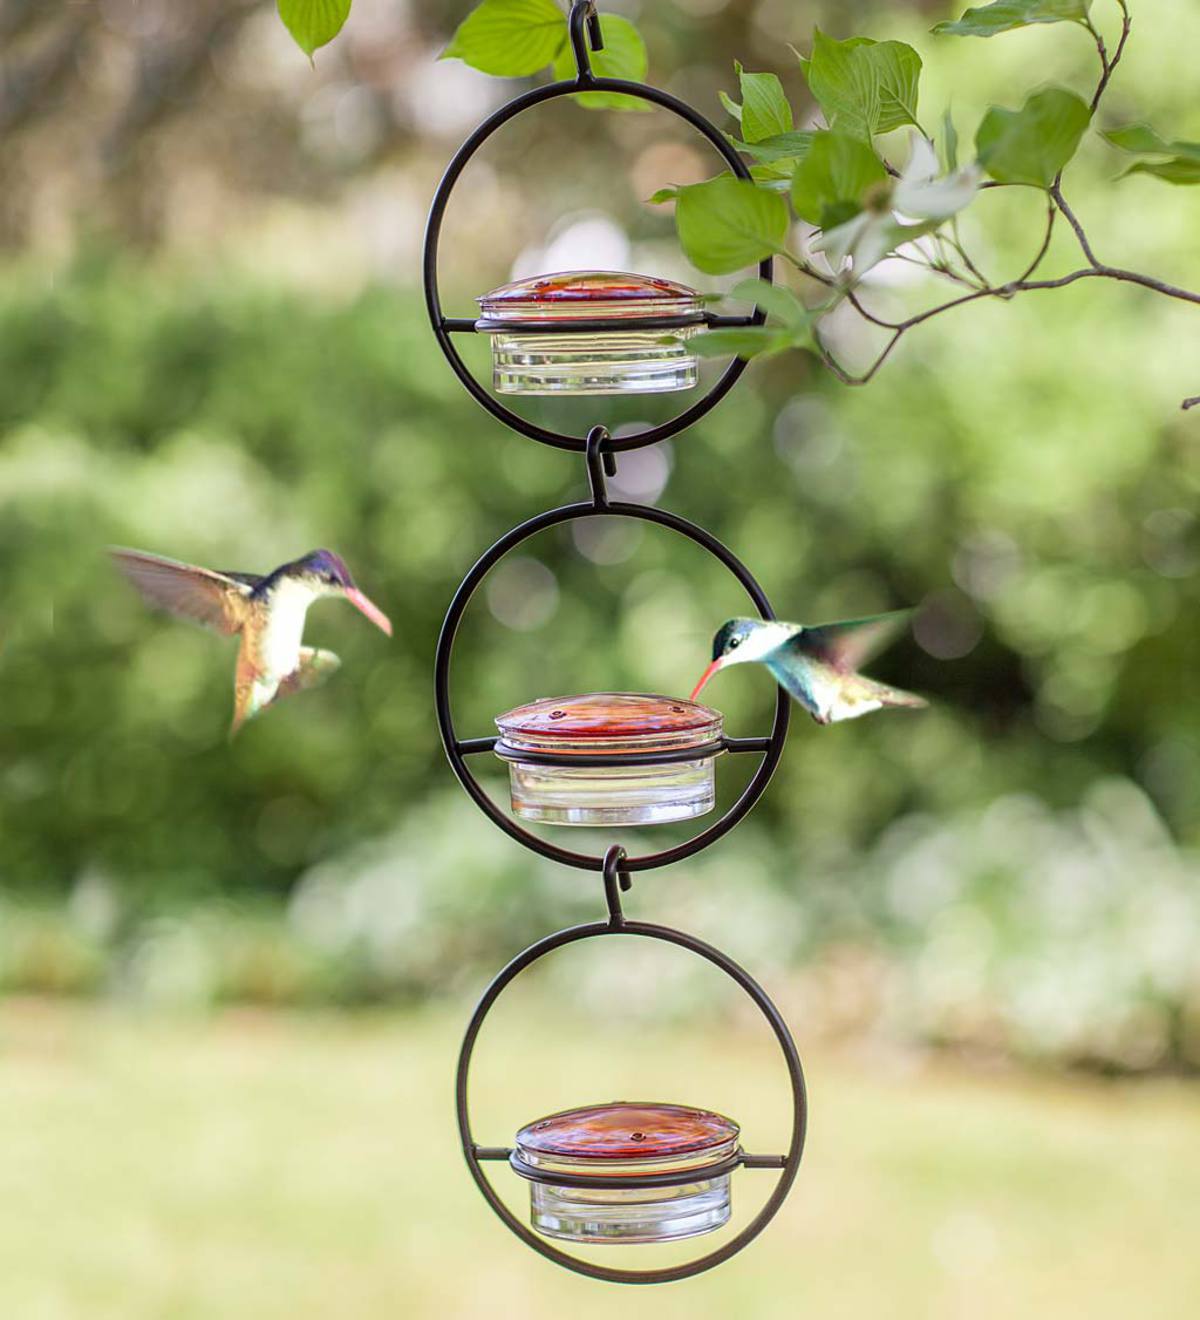 Give Hook & Ant Moat Upgraded Leakproof 26 Ounces Hapito Hummingbird Feeder Garden Humming Bird Feeder for Outside Hand Blown Glass Hummingbird Feeders for Outdoors Hanging